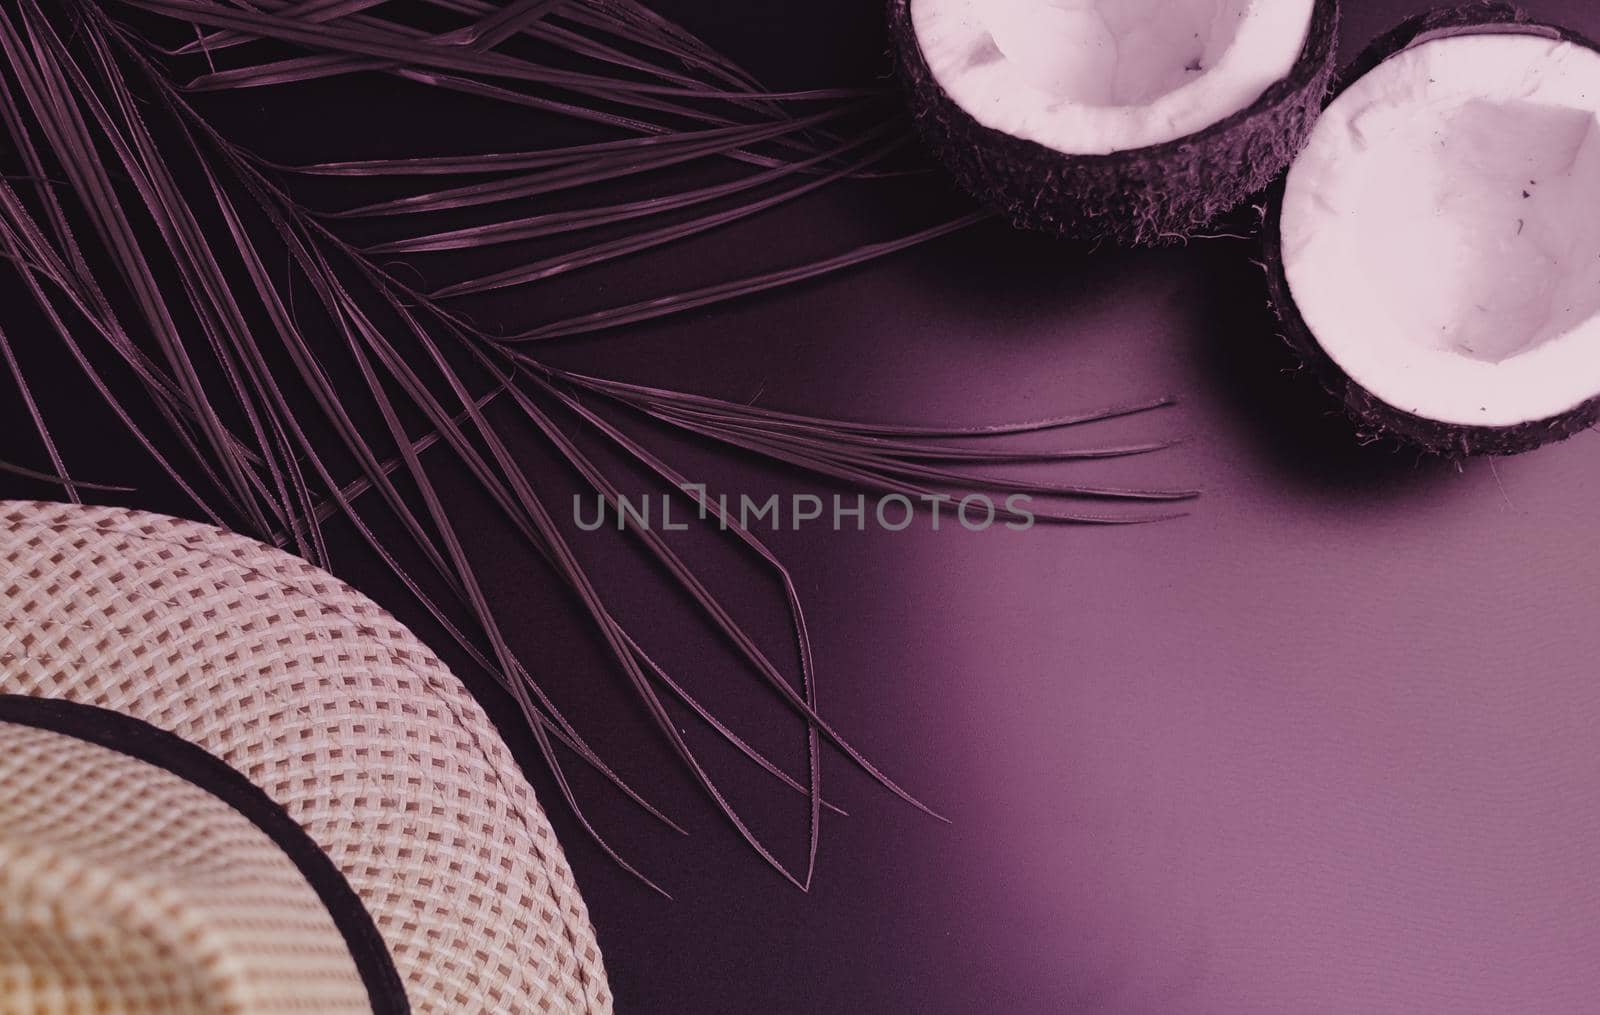 Summer composition with neon lights. Tropical palm leaves, hat, coconut on a dark background. The concept of the summer season, parties and heat. Flat lay, top view, copy space